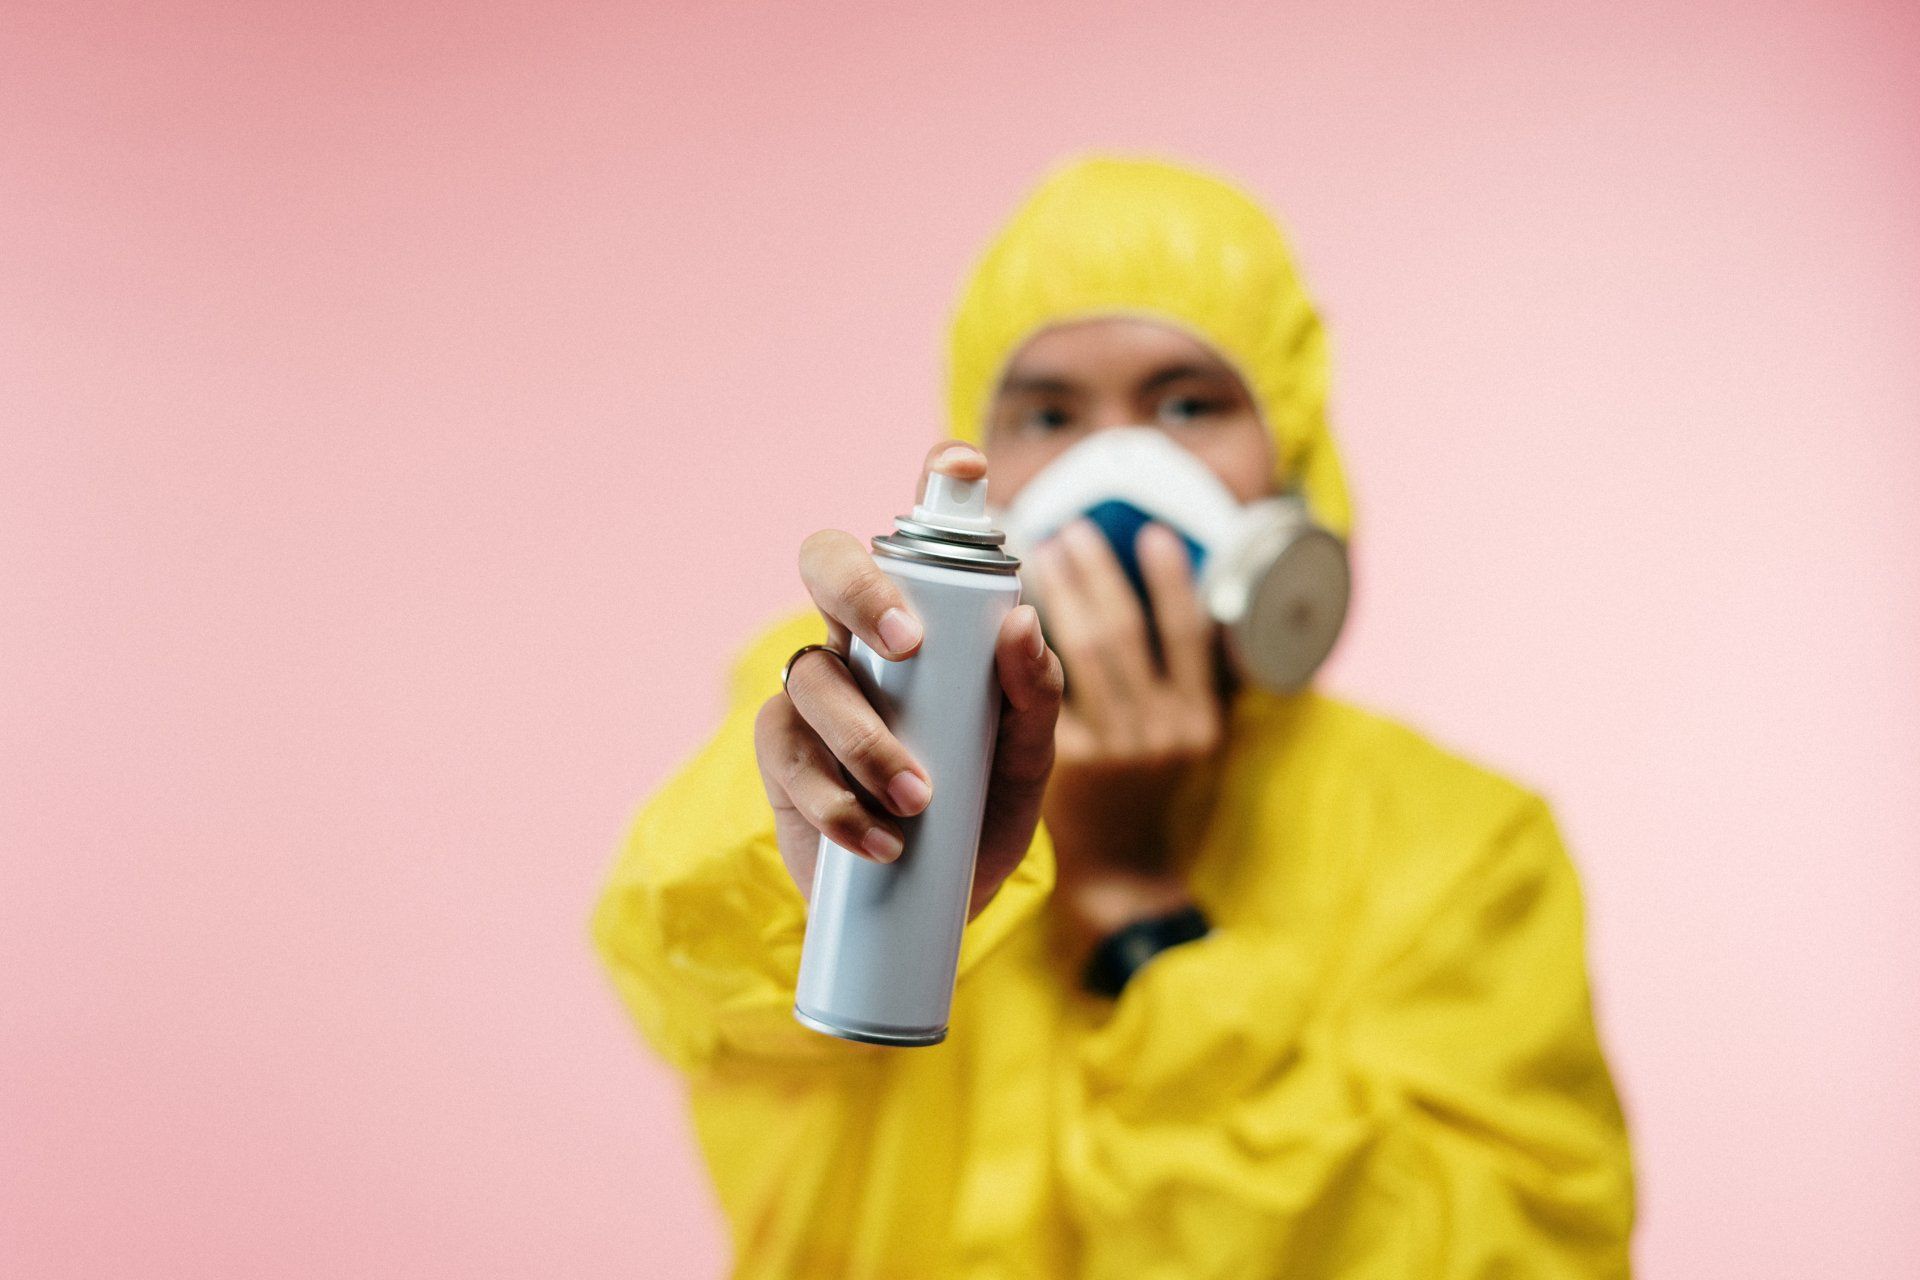 man wearing yellow protection suit in pink background wearing a mask and holding pest spray